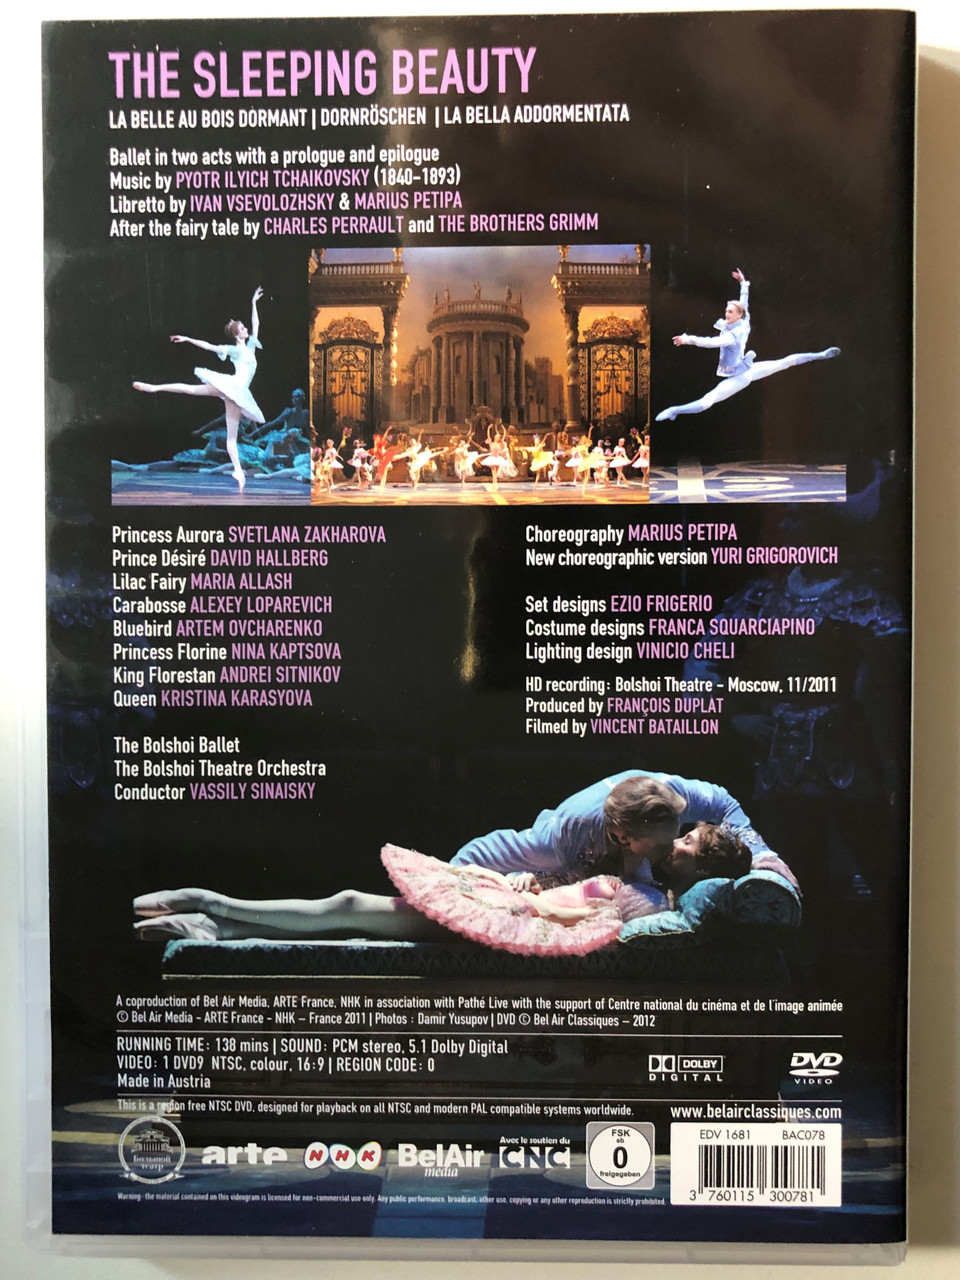 TCHAIKOVSKY_Sleeping_Beauty_Ballet_in_two_acts_with_a_prologue_and_epilogue_Libretto_by_IVAN_VSEVOLOZHSKY_MARIUS_PETIPA_The_Bolshoi_Ballet_The_Bolshoi_Theatre_Orchestra_F_3__20694.1691727763.1280.1280.JPG (960×1280)